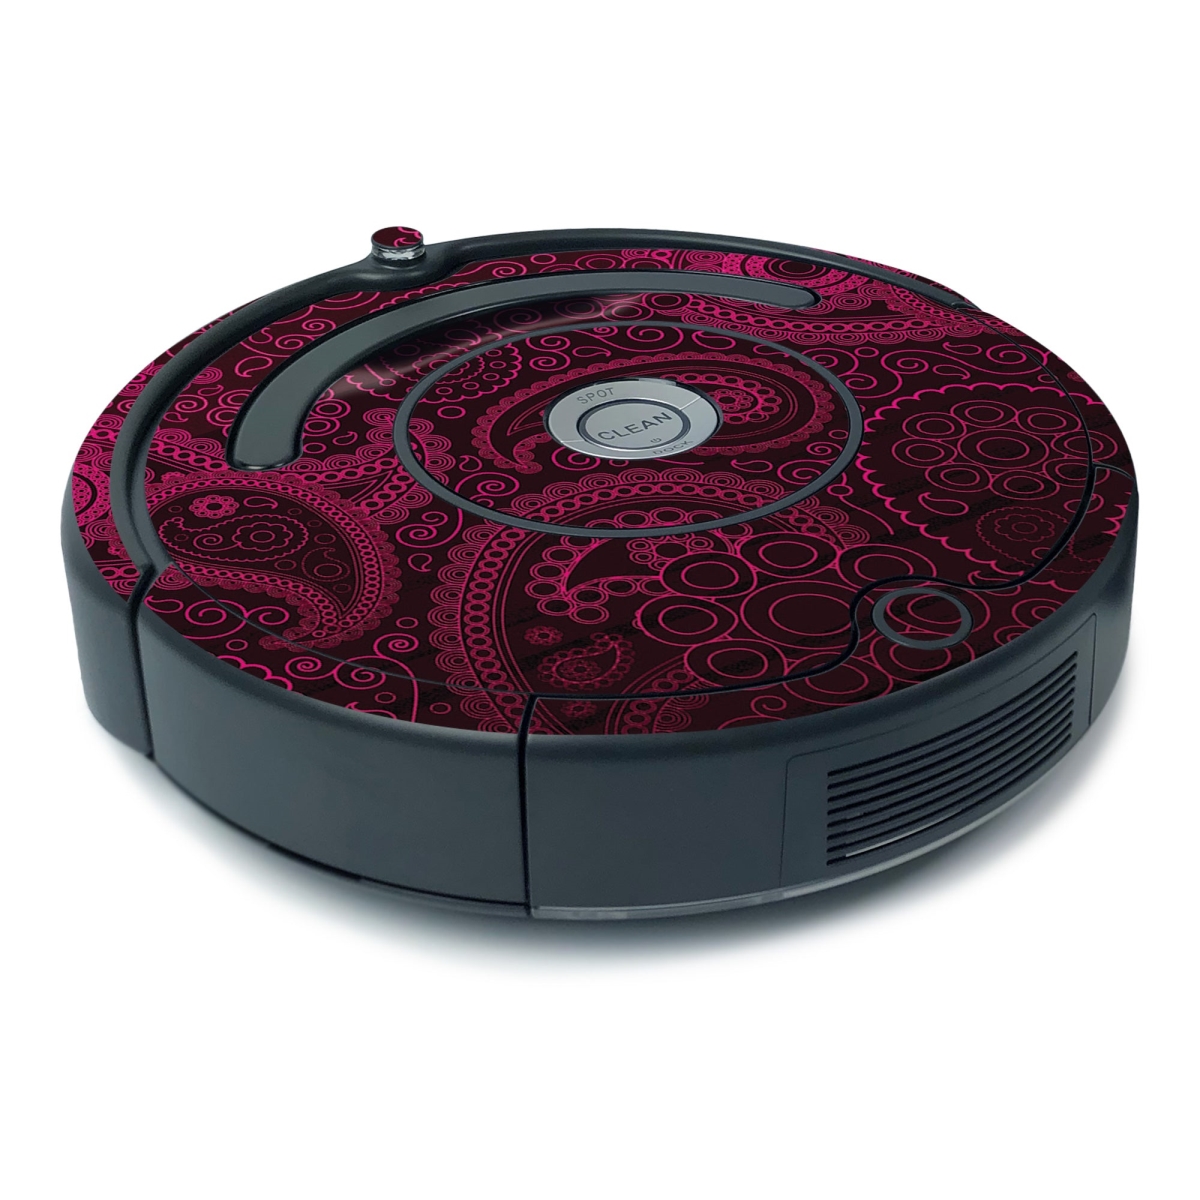 Picture of MightySkins IRRO675MIN-Paisley Skin for iRobot Roomba 675 Minimal Coverage - Paisley